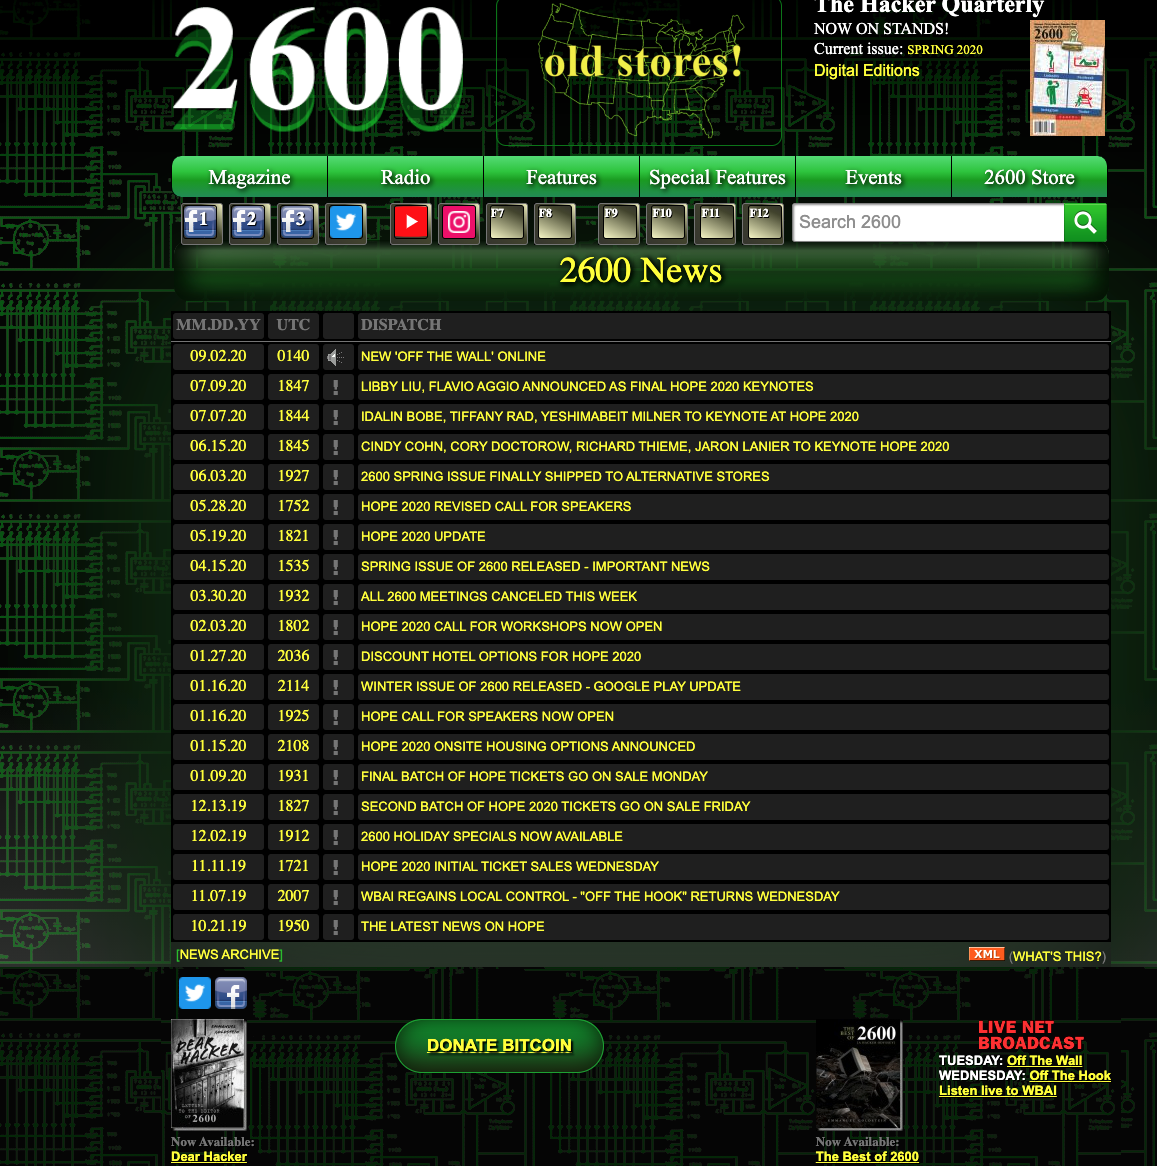 Screenshot (partial) of the extremely distinctive look of the 2600 website in September 2020.